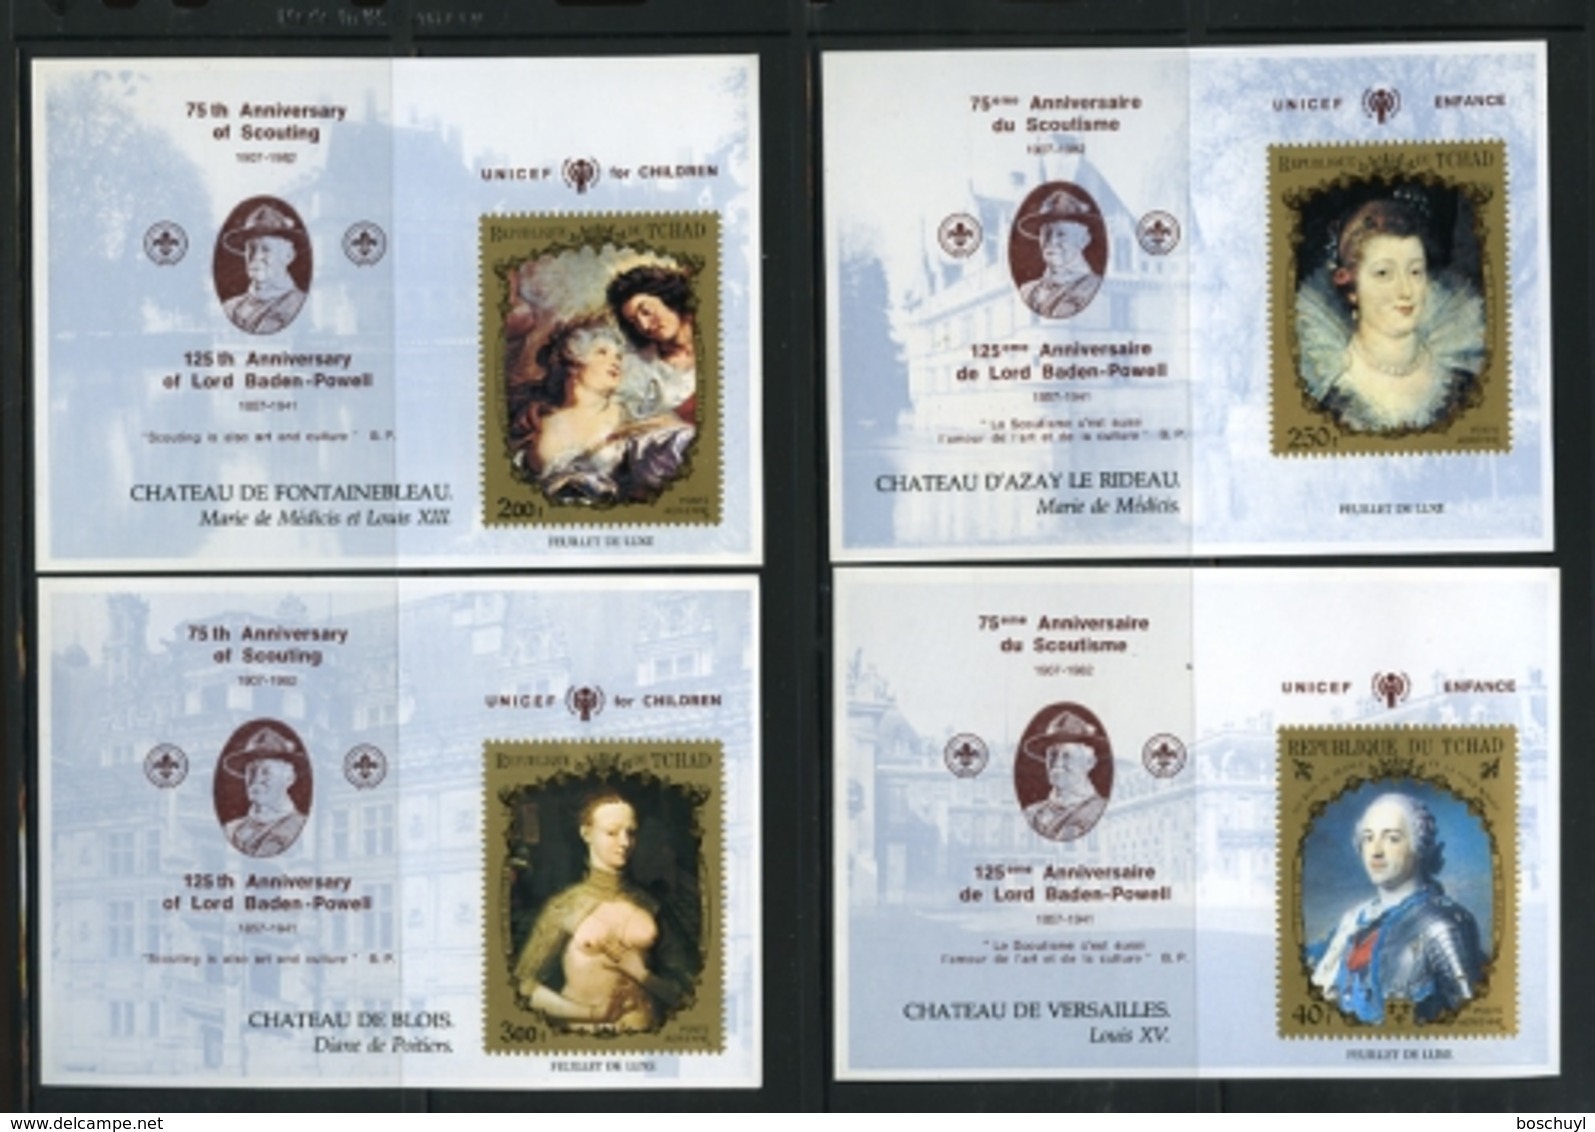 Chad, UNICEF, IYC, United Nations, Paintings, Scouting, Baden Powell, 4 MNH Imperf Sheets - Tschad (1960-...)